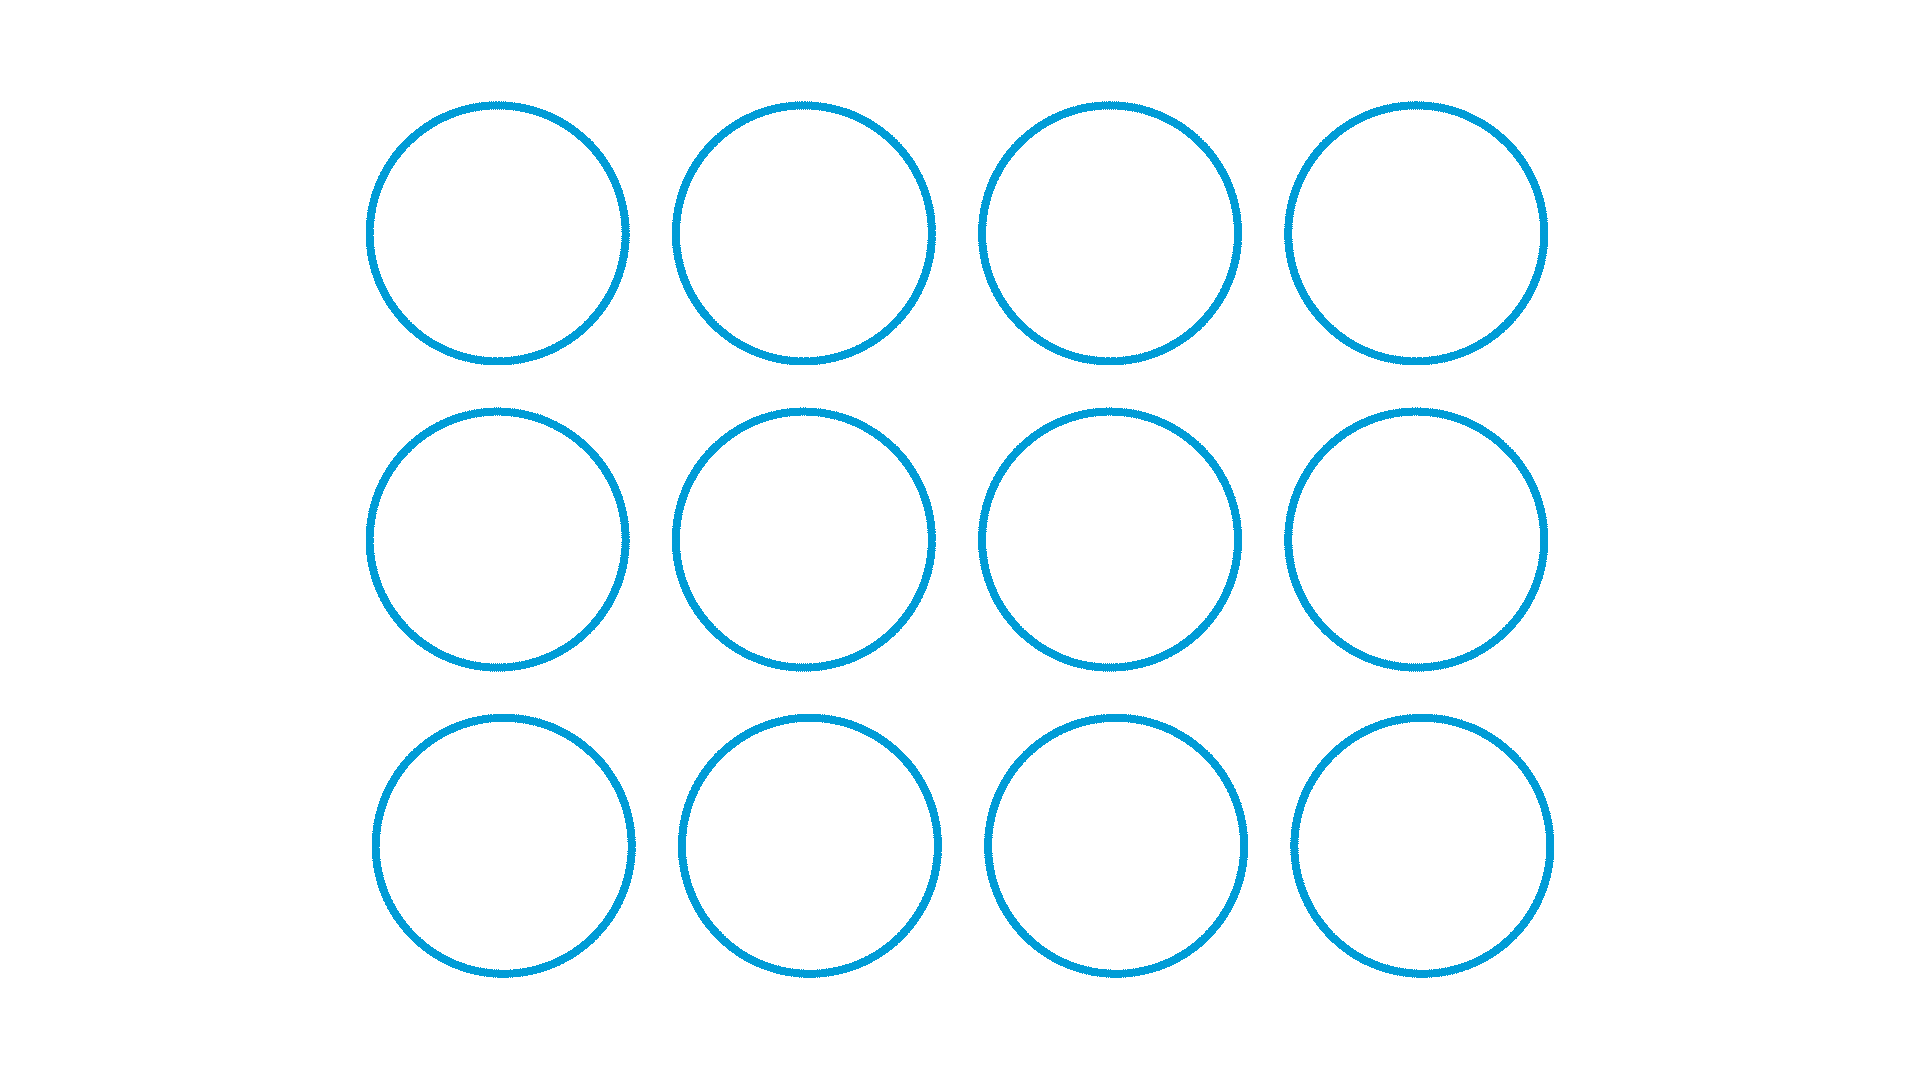 This animation transforms from 12 circles where blue and white circles are interspersed into all white circles, forming a composition of similar, white circles.